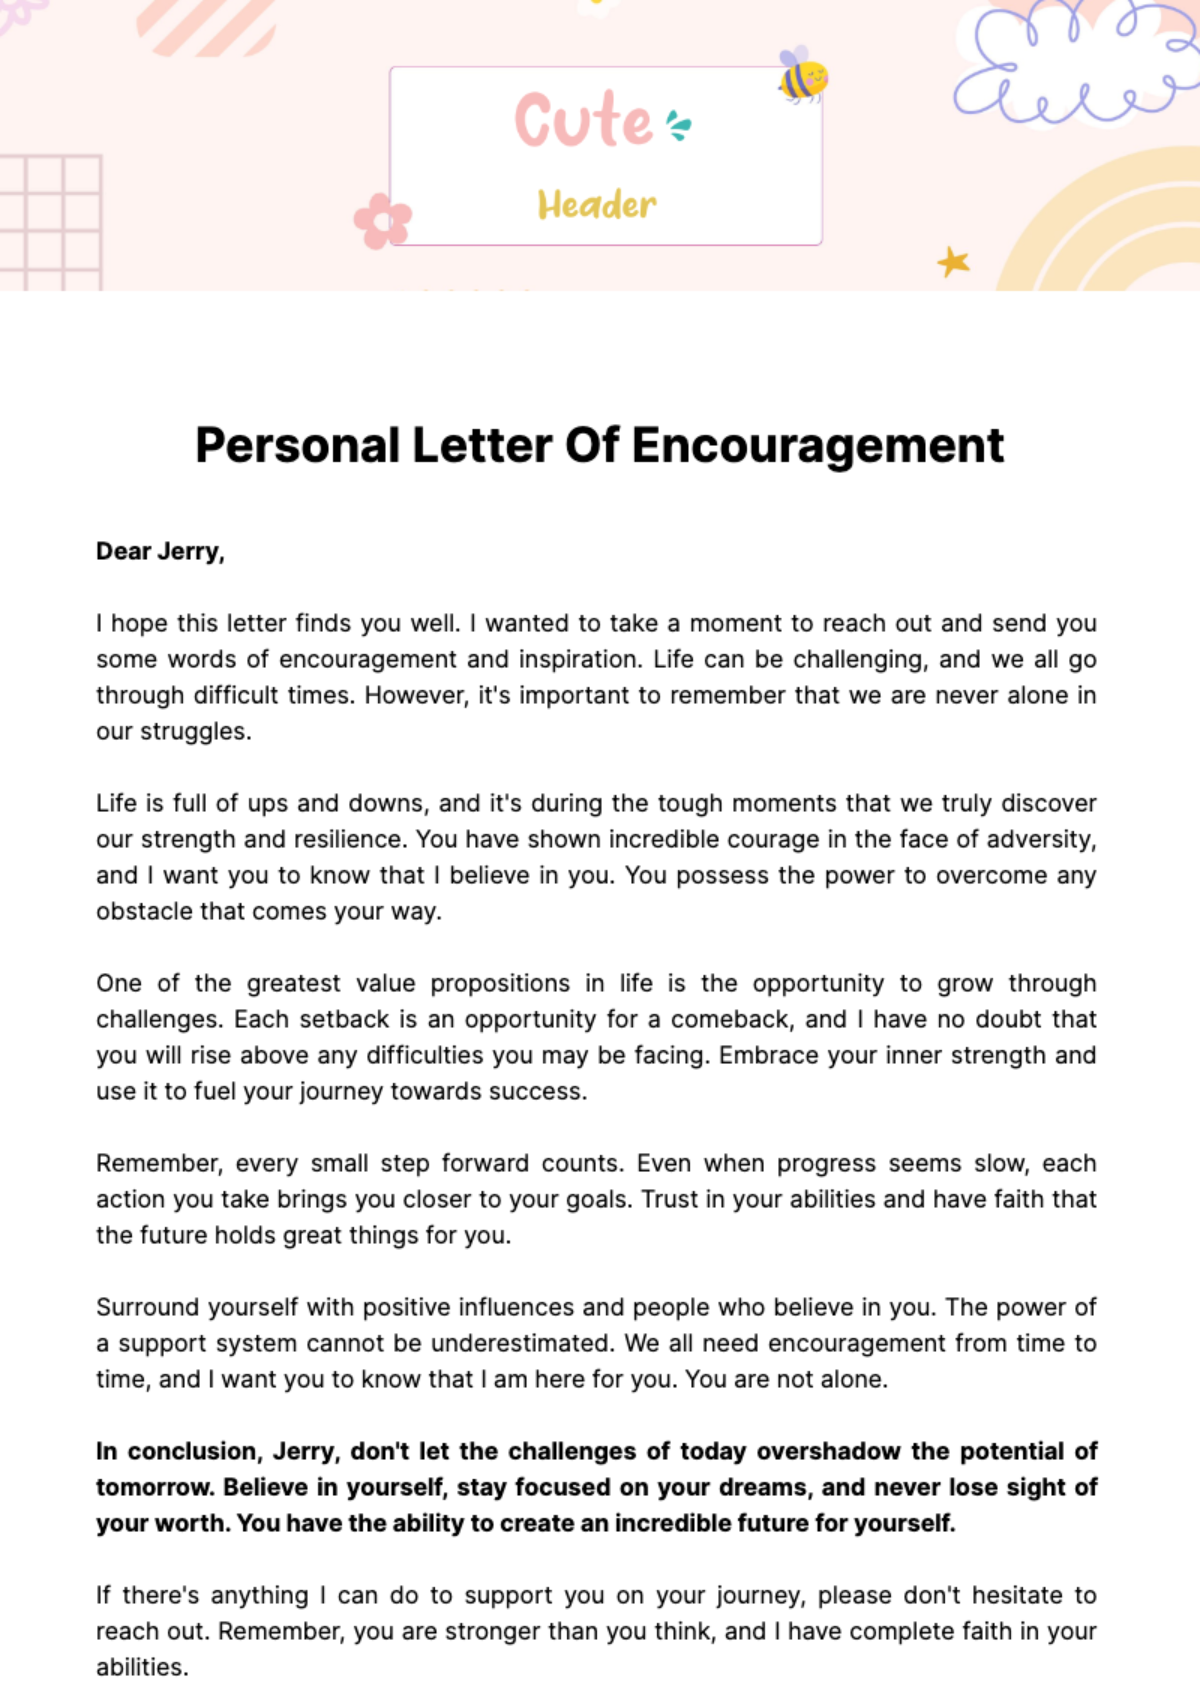 Personal Letter of Encouragement Template